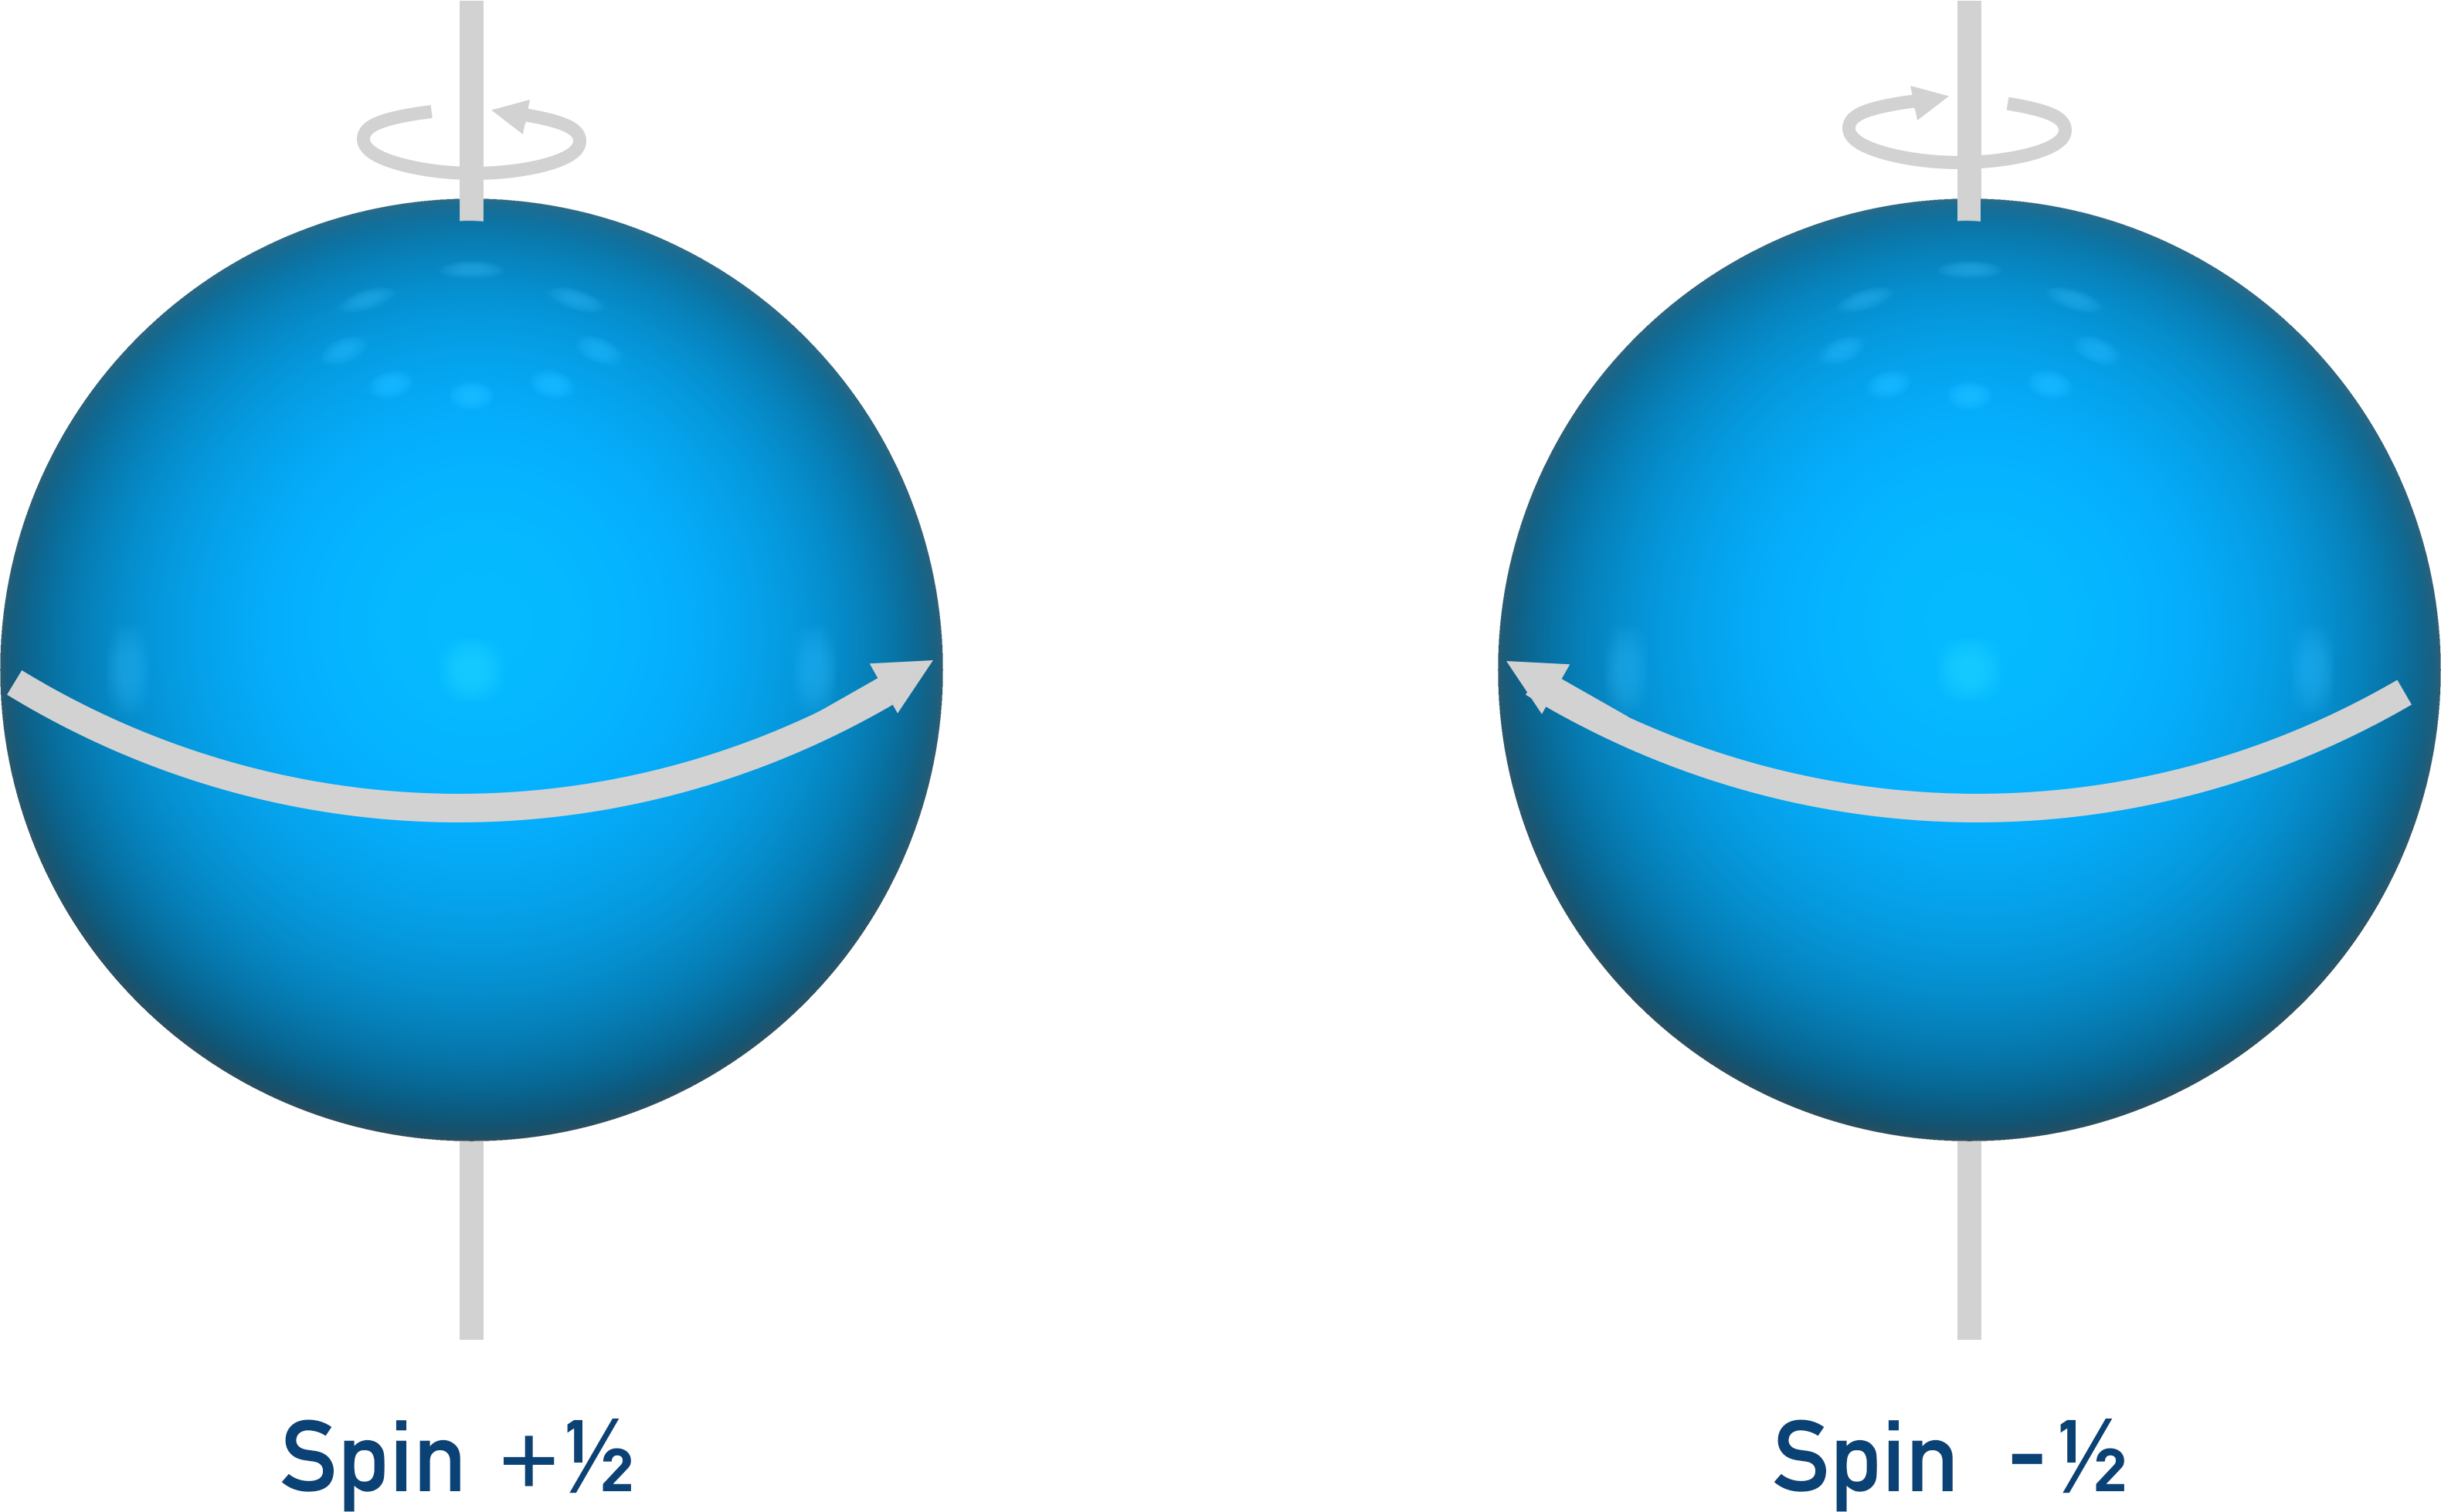 NMR spectroscopy particle spin